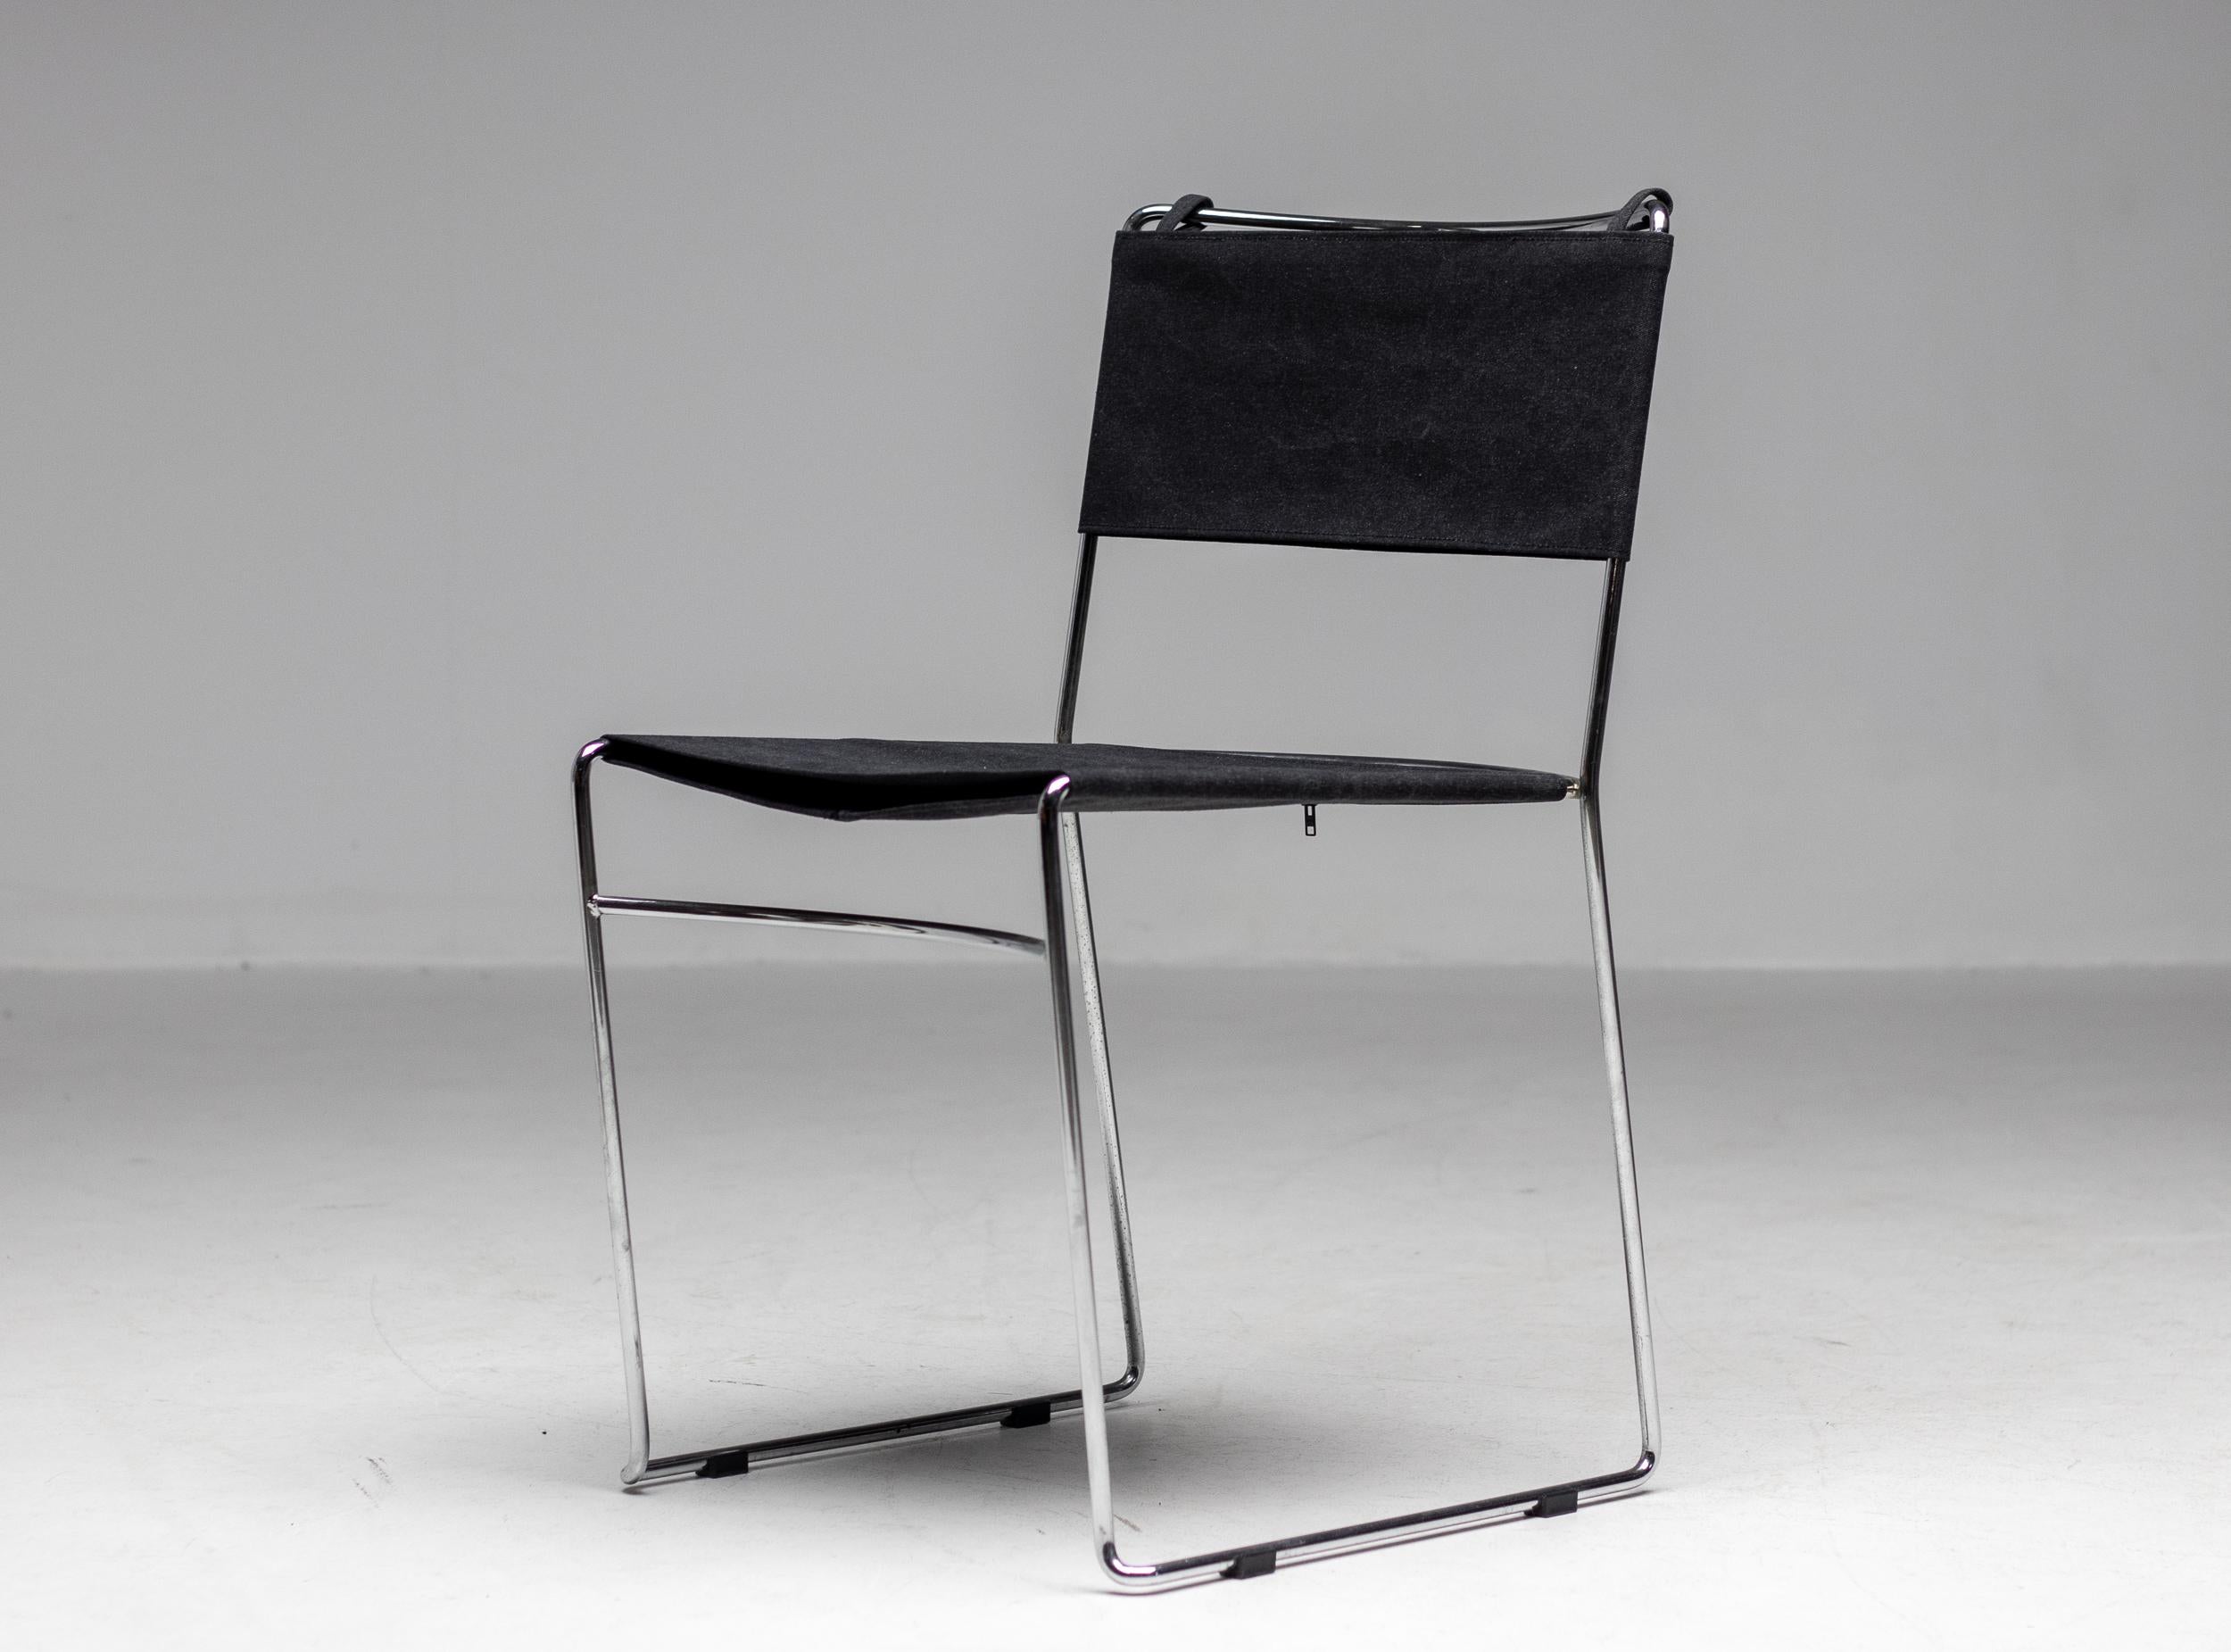 Elegant set of 4 dining chairs designed by Enzo Mari for Driade.
Chromed steel rod frame with charcoal cotton upholstery in excellent vintage condition.
Priced as a set.

Enzo Mari (1932-2020) was an Italian designer, artist, and theorist who